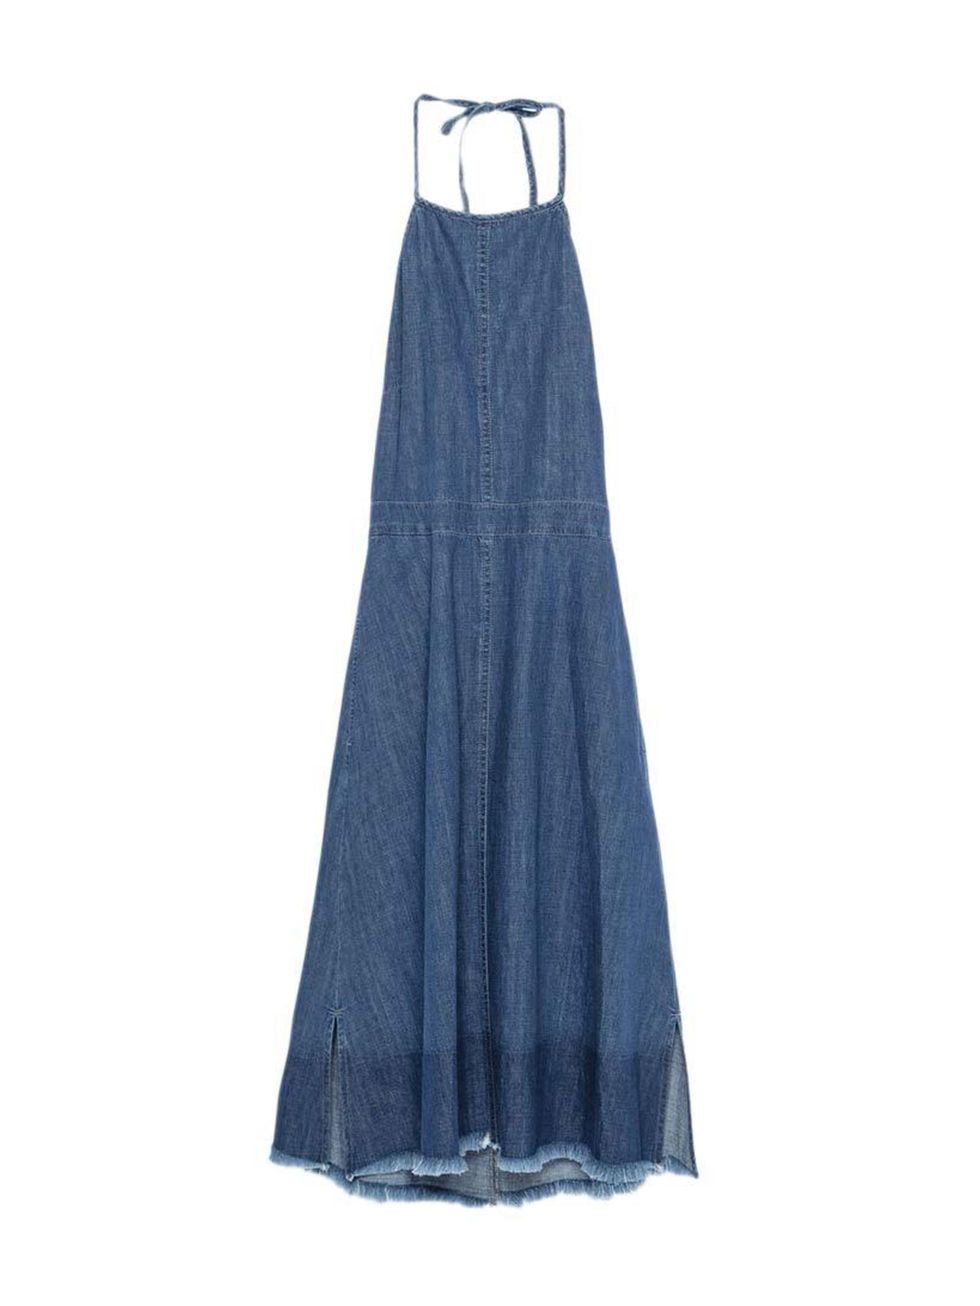 <p>Editorial Assistant Gillian Brett's love affair with denim knows no bounds.</p>

<p><a href="http://www.zara.com/uk/en/collection-aw15/woman/collection/halter-top-dress-with-frayed-hem-c733933p2775627.html" target="_blank">Zara</a> dress, £29.99</p>